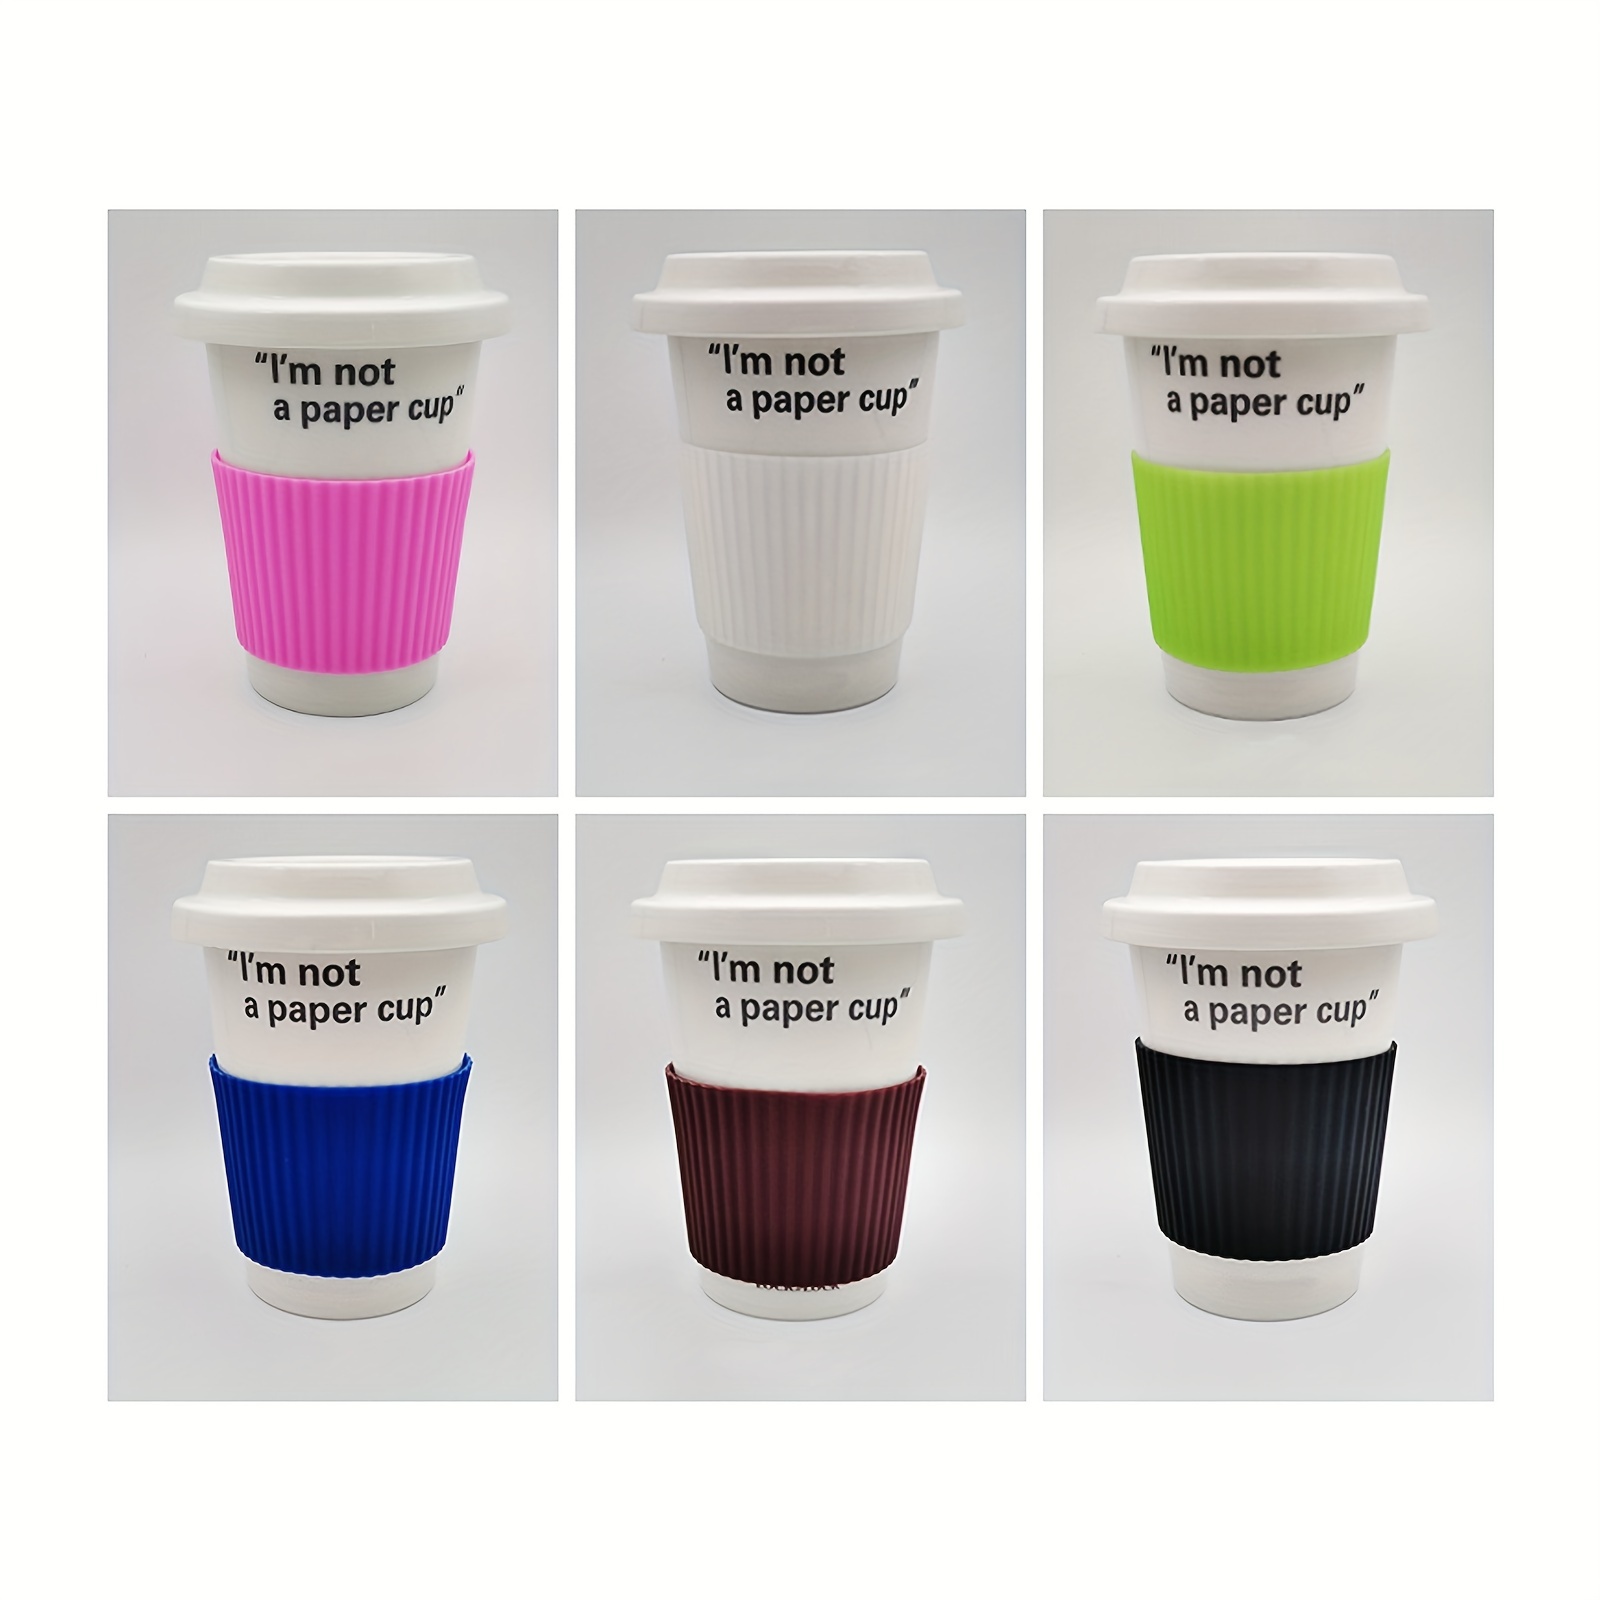 Silicone Cup Lids Coffee Mug Cover for Coffee Tea Cups 6pcs